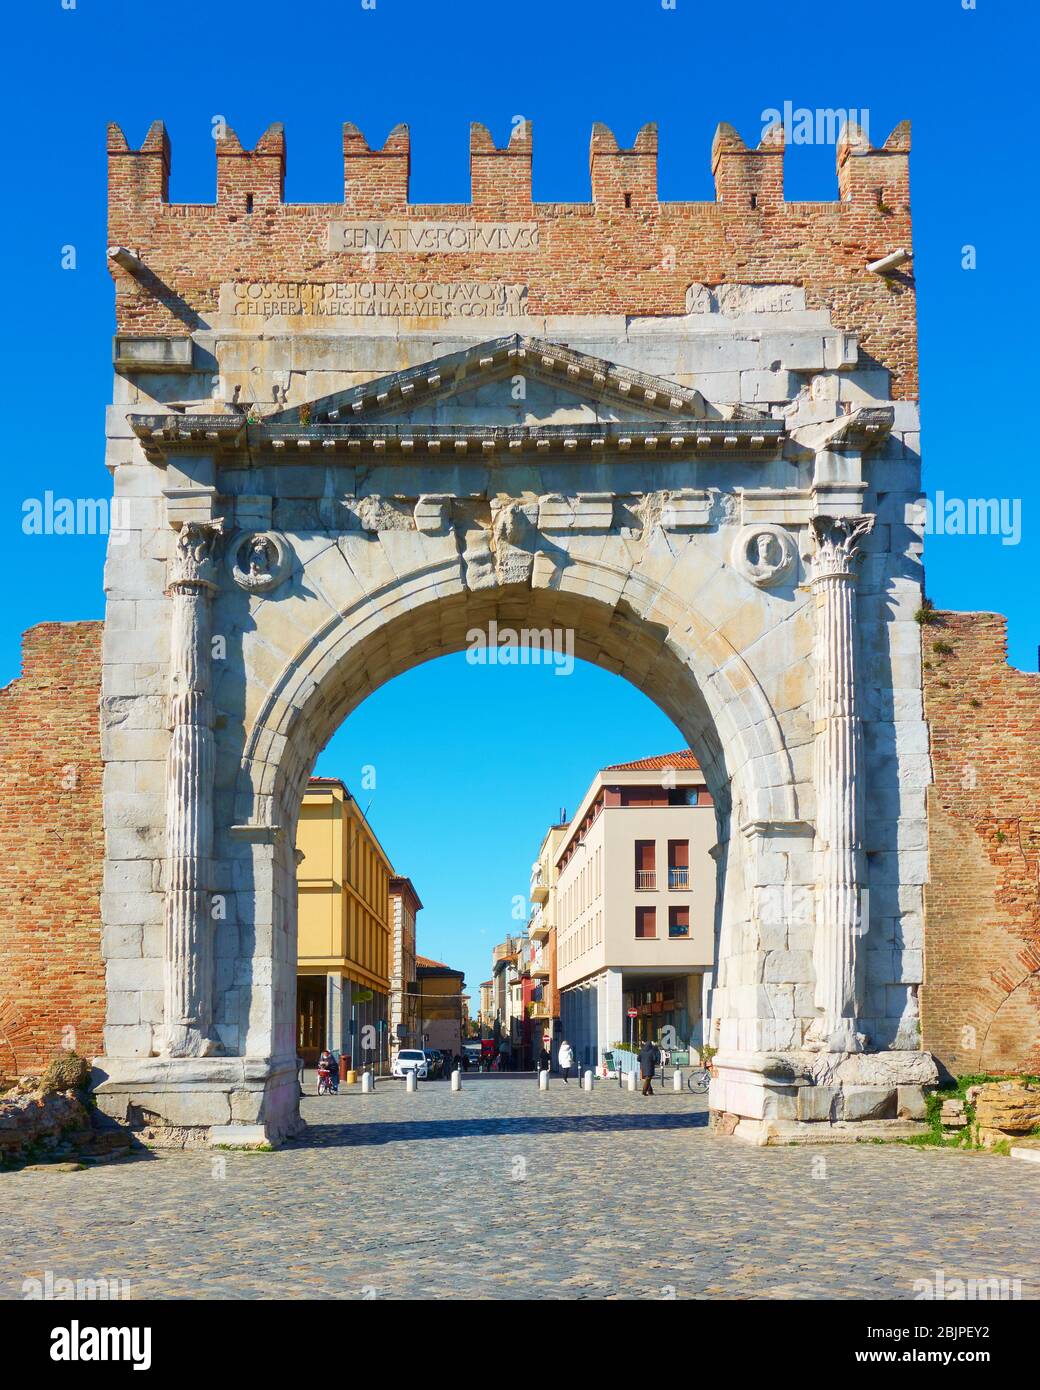 Arch of Augustus - Gate in the old town of Rimini, Italy. It was built in 27 BC and it is the oldest Roman arch which survives Stock Photo